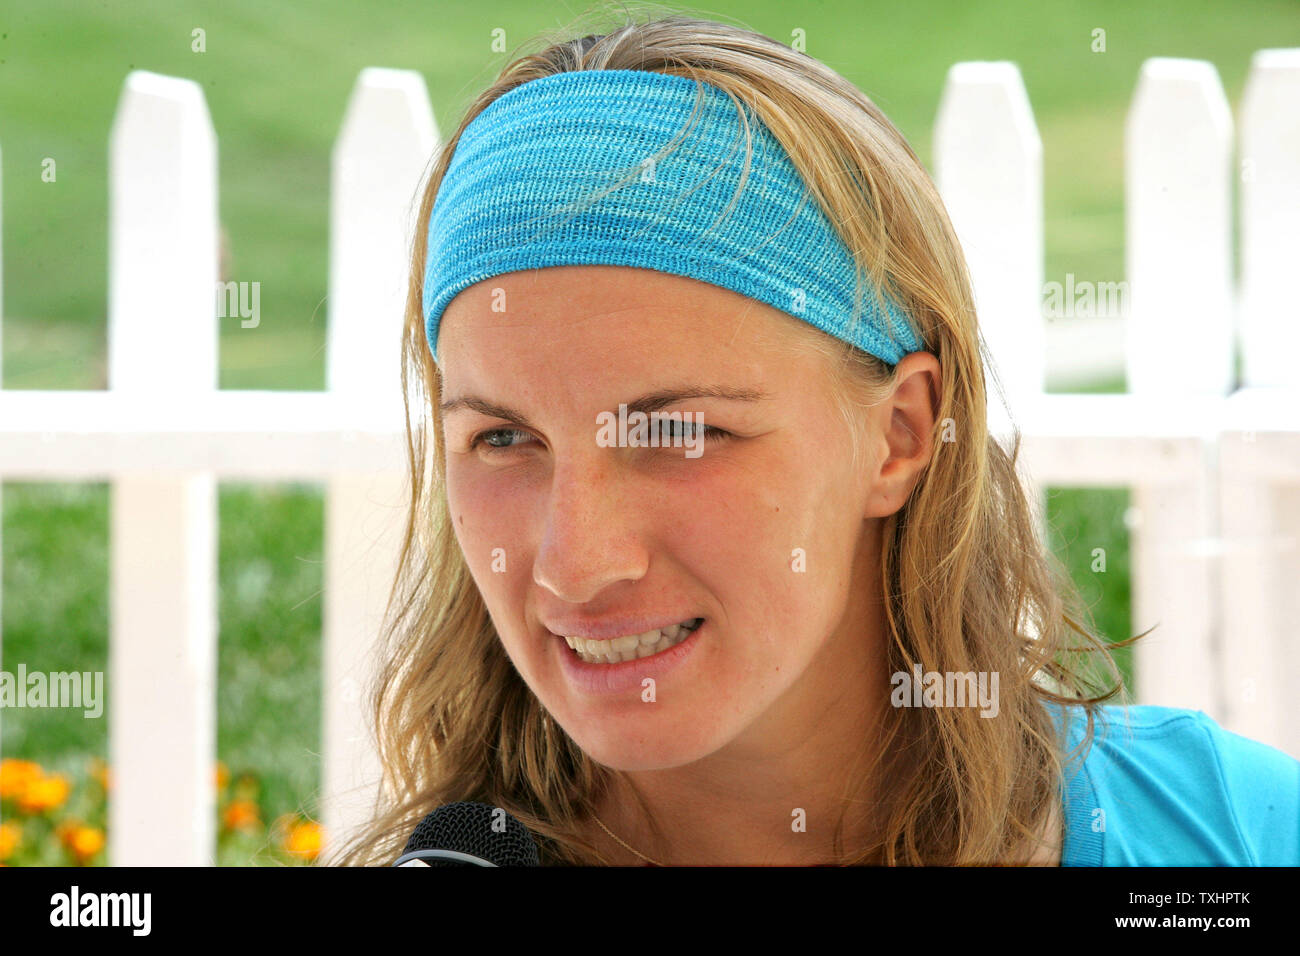 Svetlana Kuznetsova of Russia, 2004 US Open Singles Champion and 4th ranked on WTA Tour, smiles during interviews on media day at Acura Classic women's tennis tournament, Carlsbad, California, USA on August 01, 2005.  Major seeded players Maria Sharapova and Serena Williams have withdrawn due to injuries. While Kuznetsova, Lindsay Davenport and Kim Clijsters begin competing this week with finals on August 7, 2005. (UPI Photo/Tom Theobald) Stock Photo